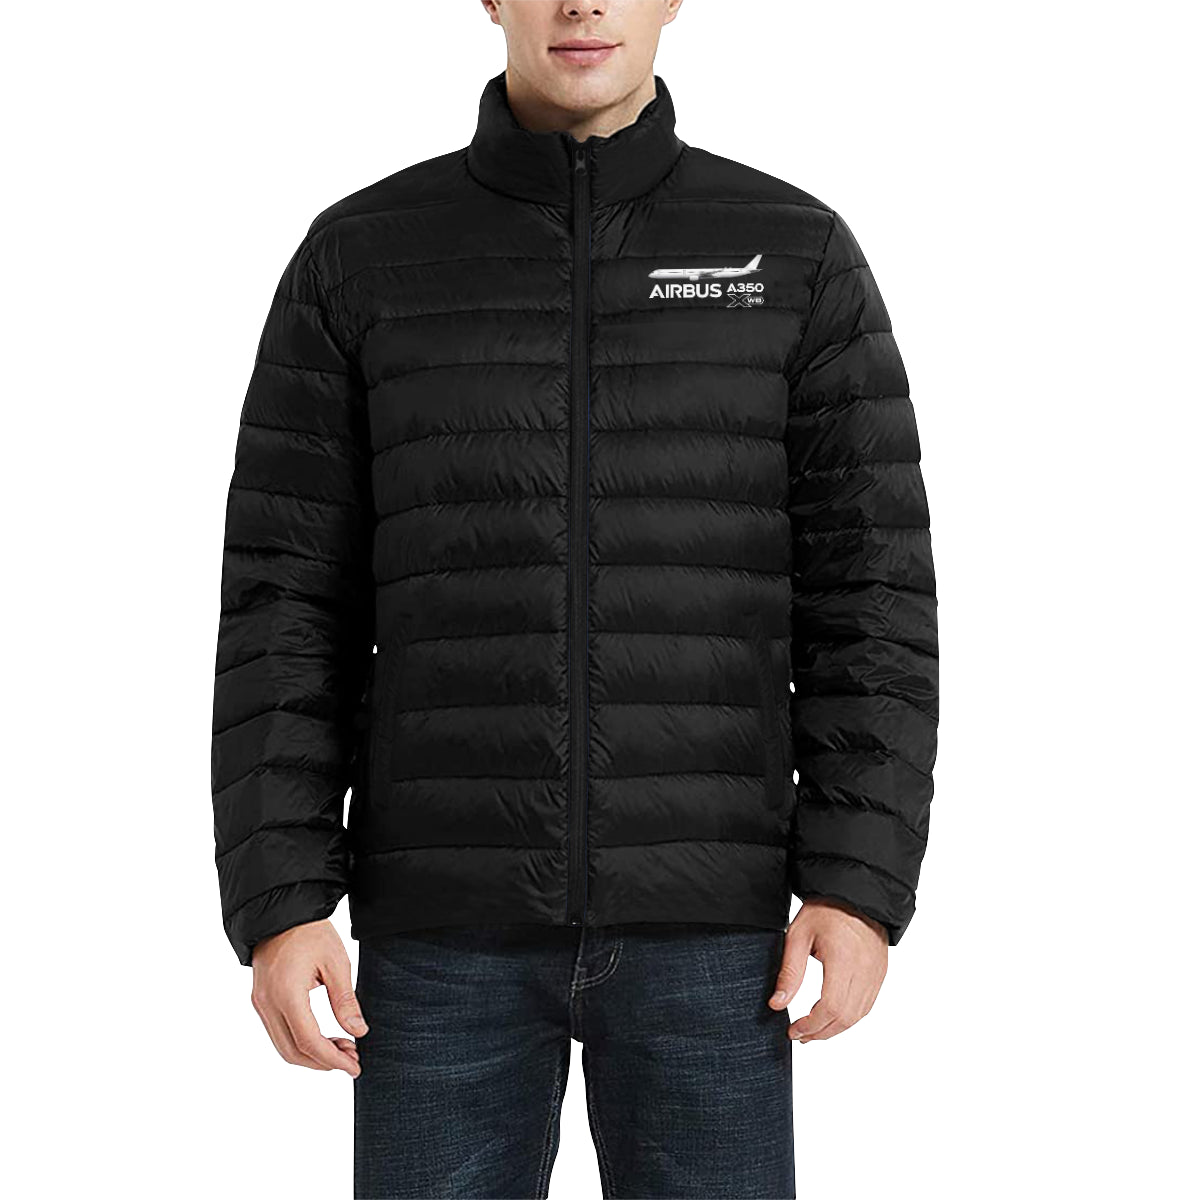 Airbus A350 Men's Stand Collar Padded Jacket e-joyer